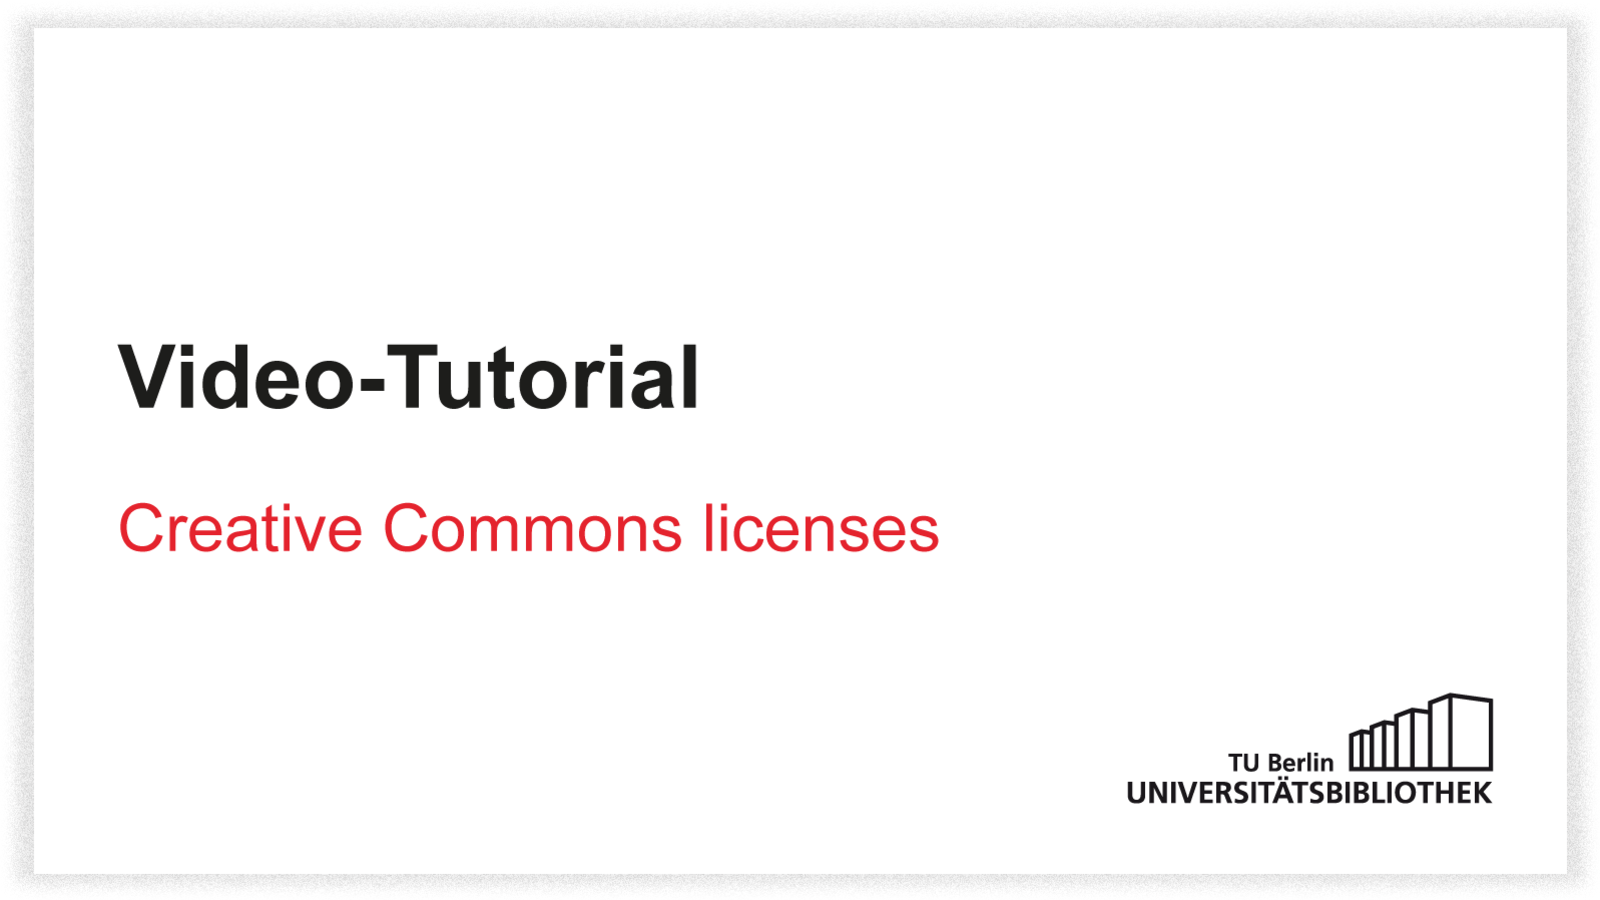 Video-Tutorial: Creative Commons licenses, englisch only